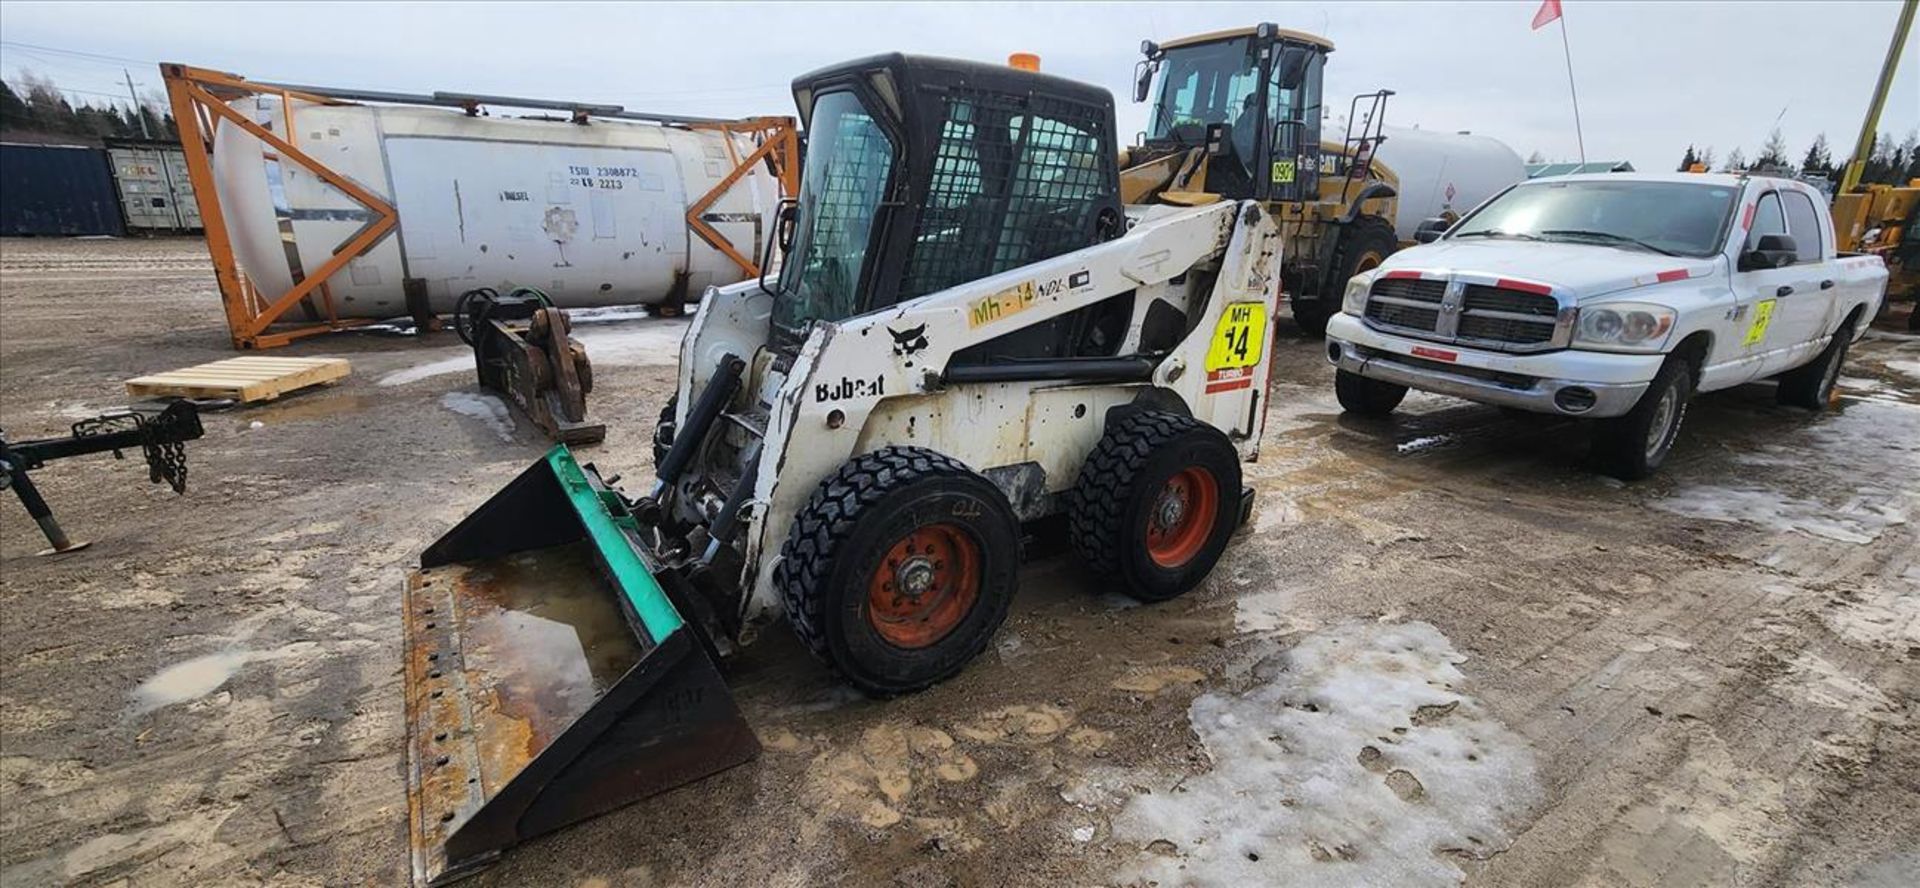 BobCat skidsteer, mod. S220 Turbo, ser. no. 526214558, approx. 621 hrs. (requires repair) w/